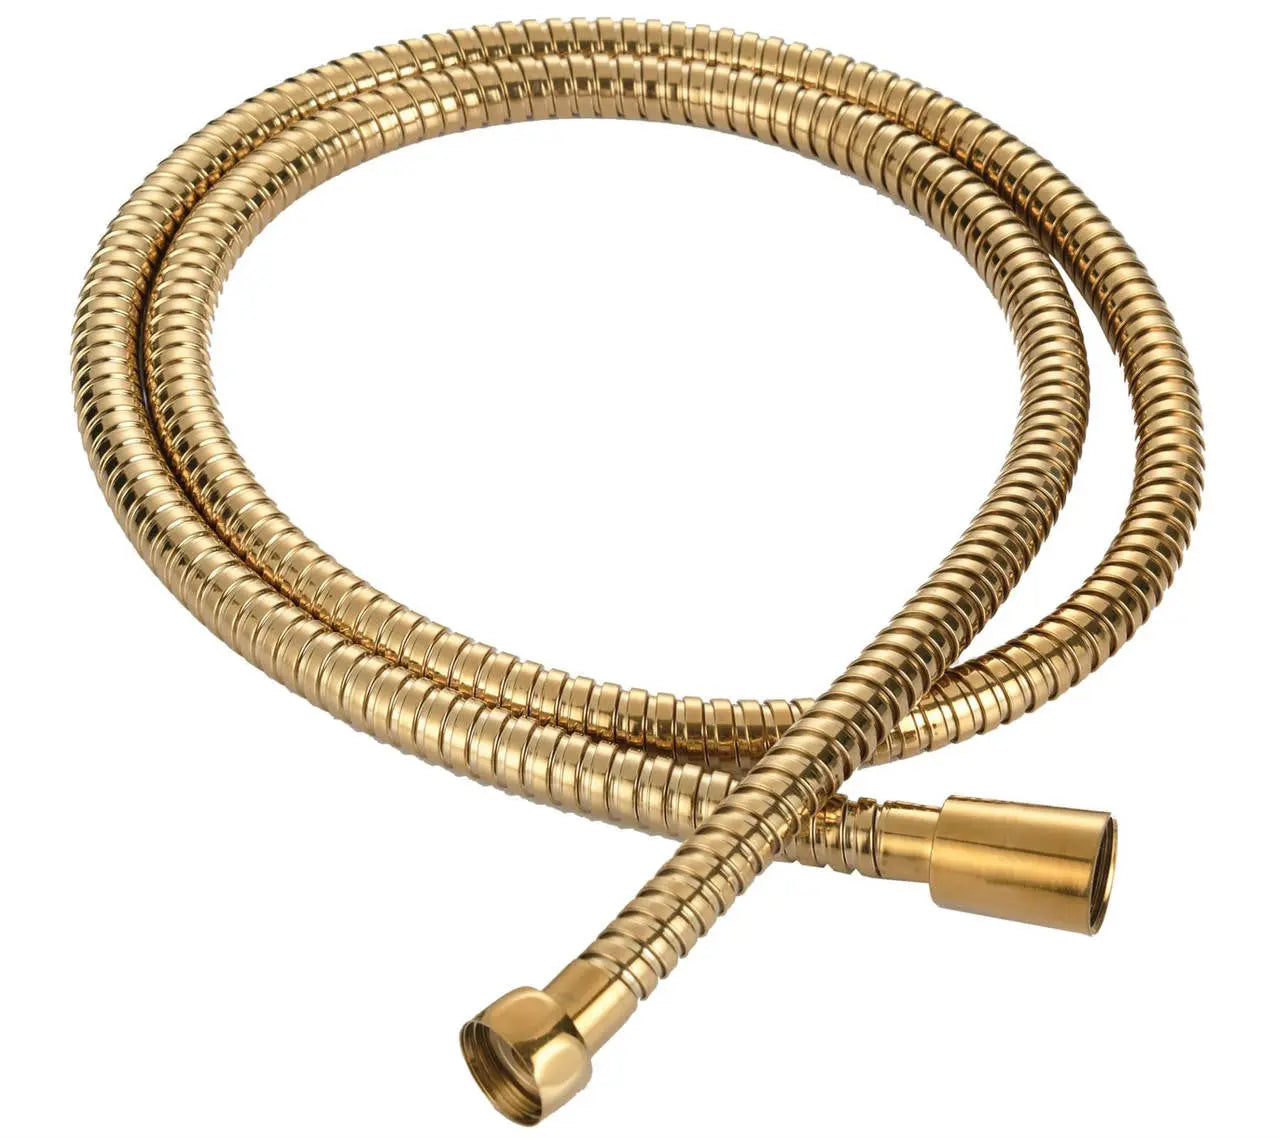 150cm Gold Shower Hose Replacement Flexible Pipe Bathroom Shower Hoses